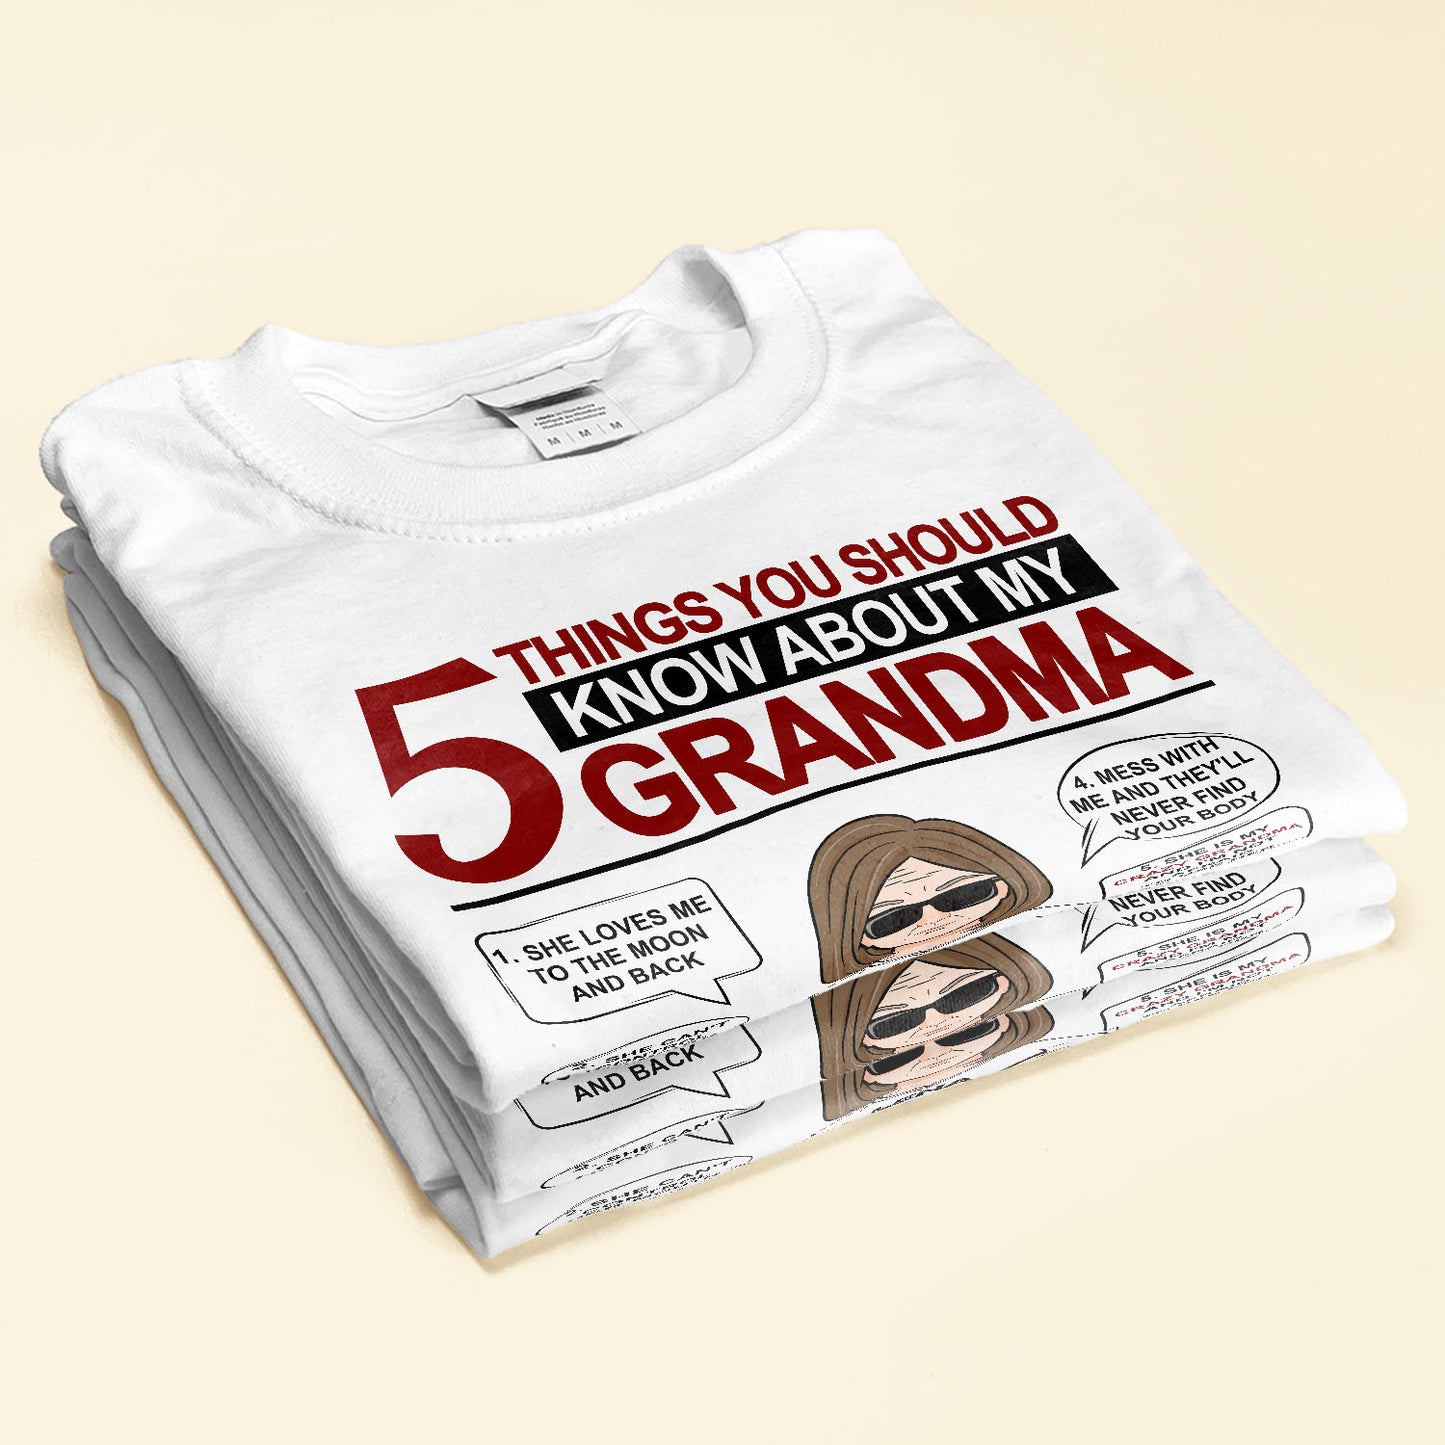 5 Things You Should Know About My Grandma - Personalized Shirt - Back To School, First Day Of School, Funny Gift For Grandkids, Grandchildren, Grandson, Granddaughter